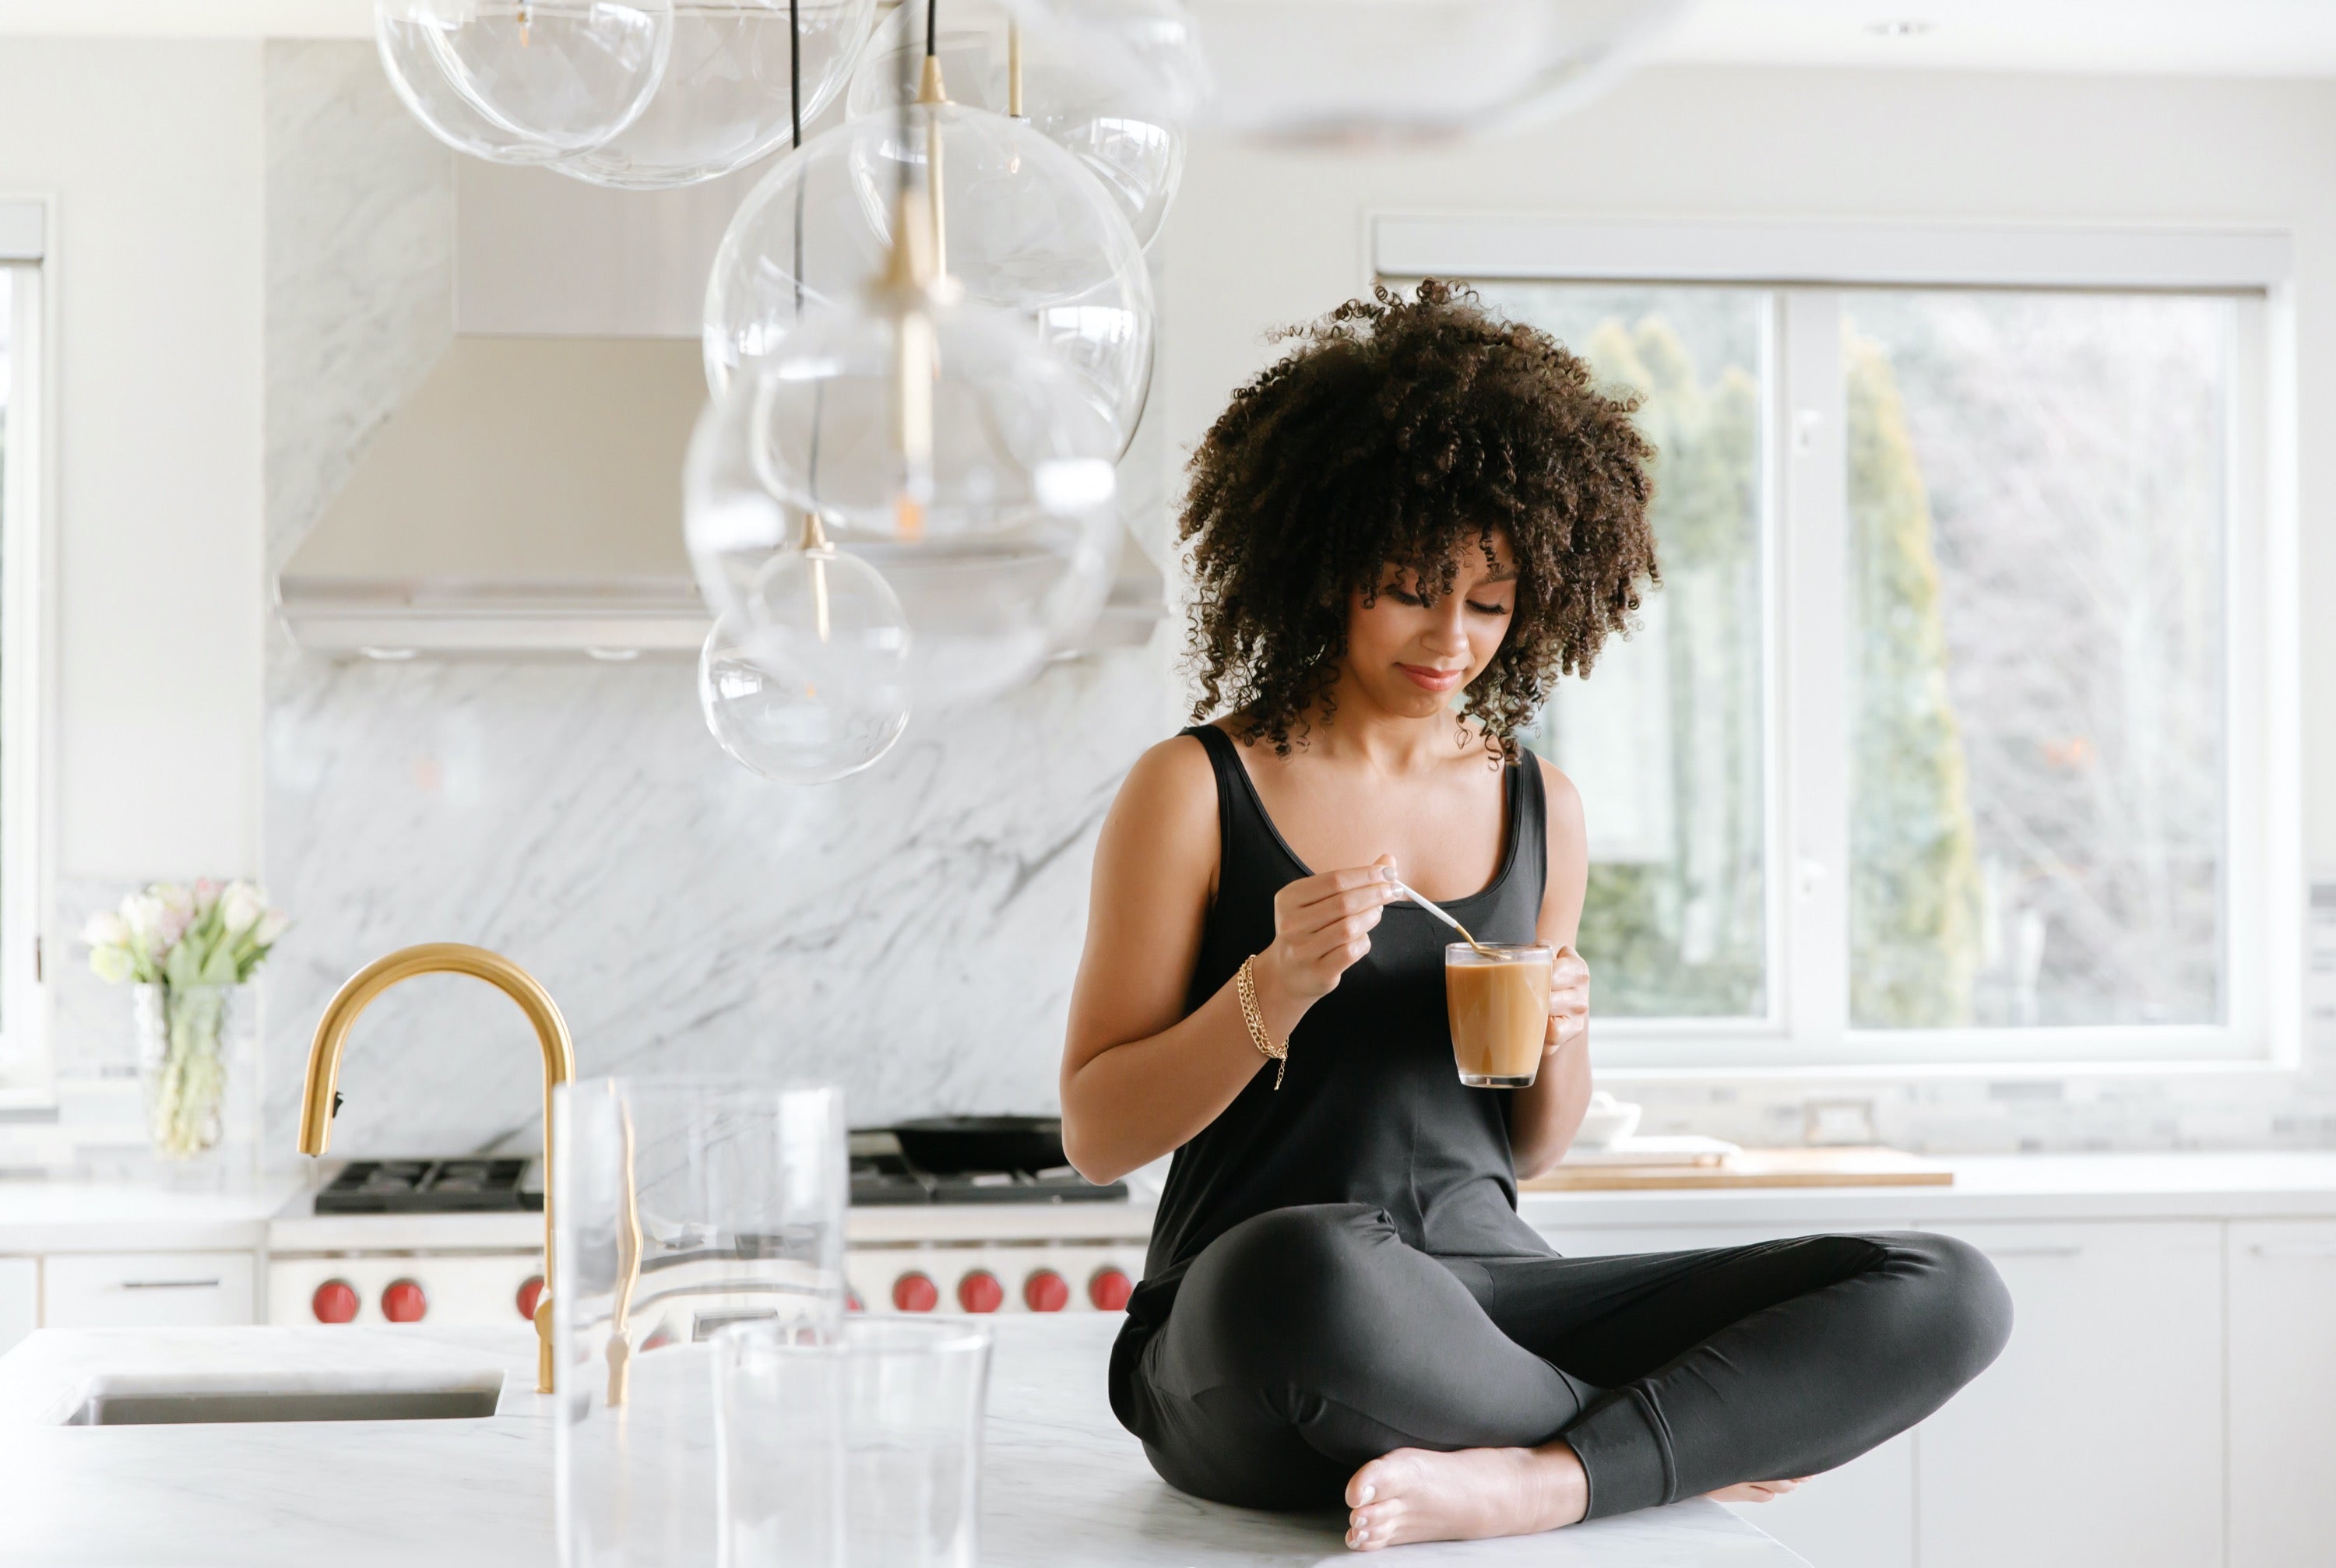 model drinking coffee wearing tuesday romper on kitchen counter